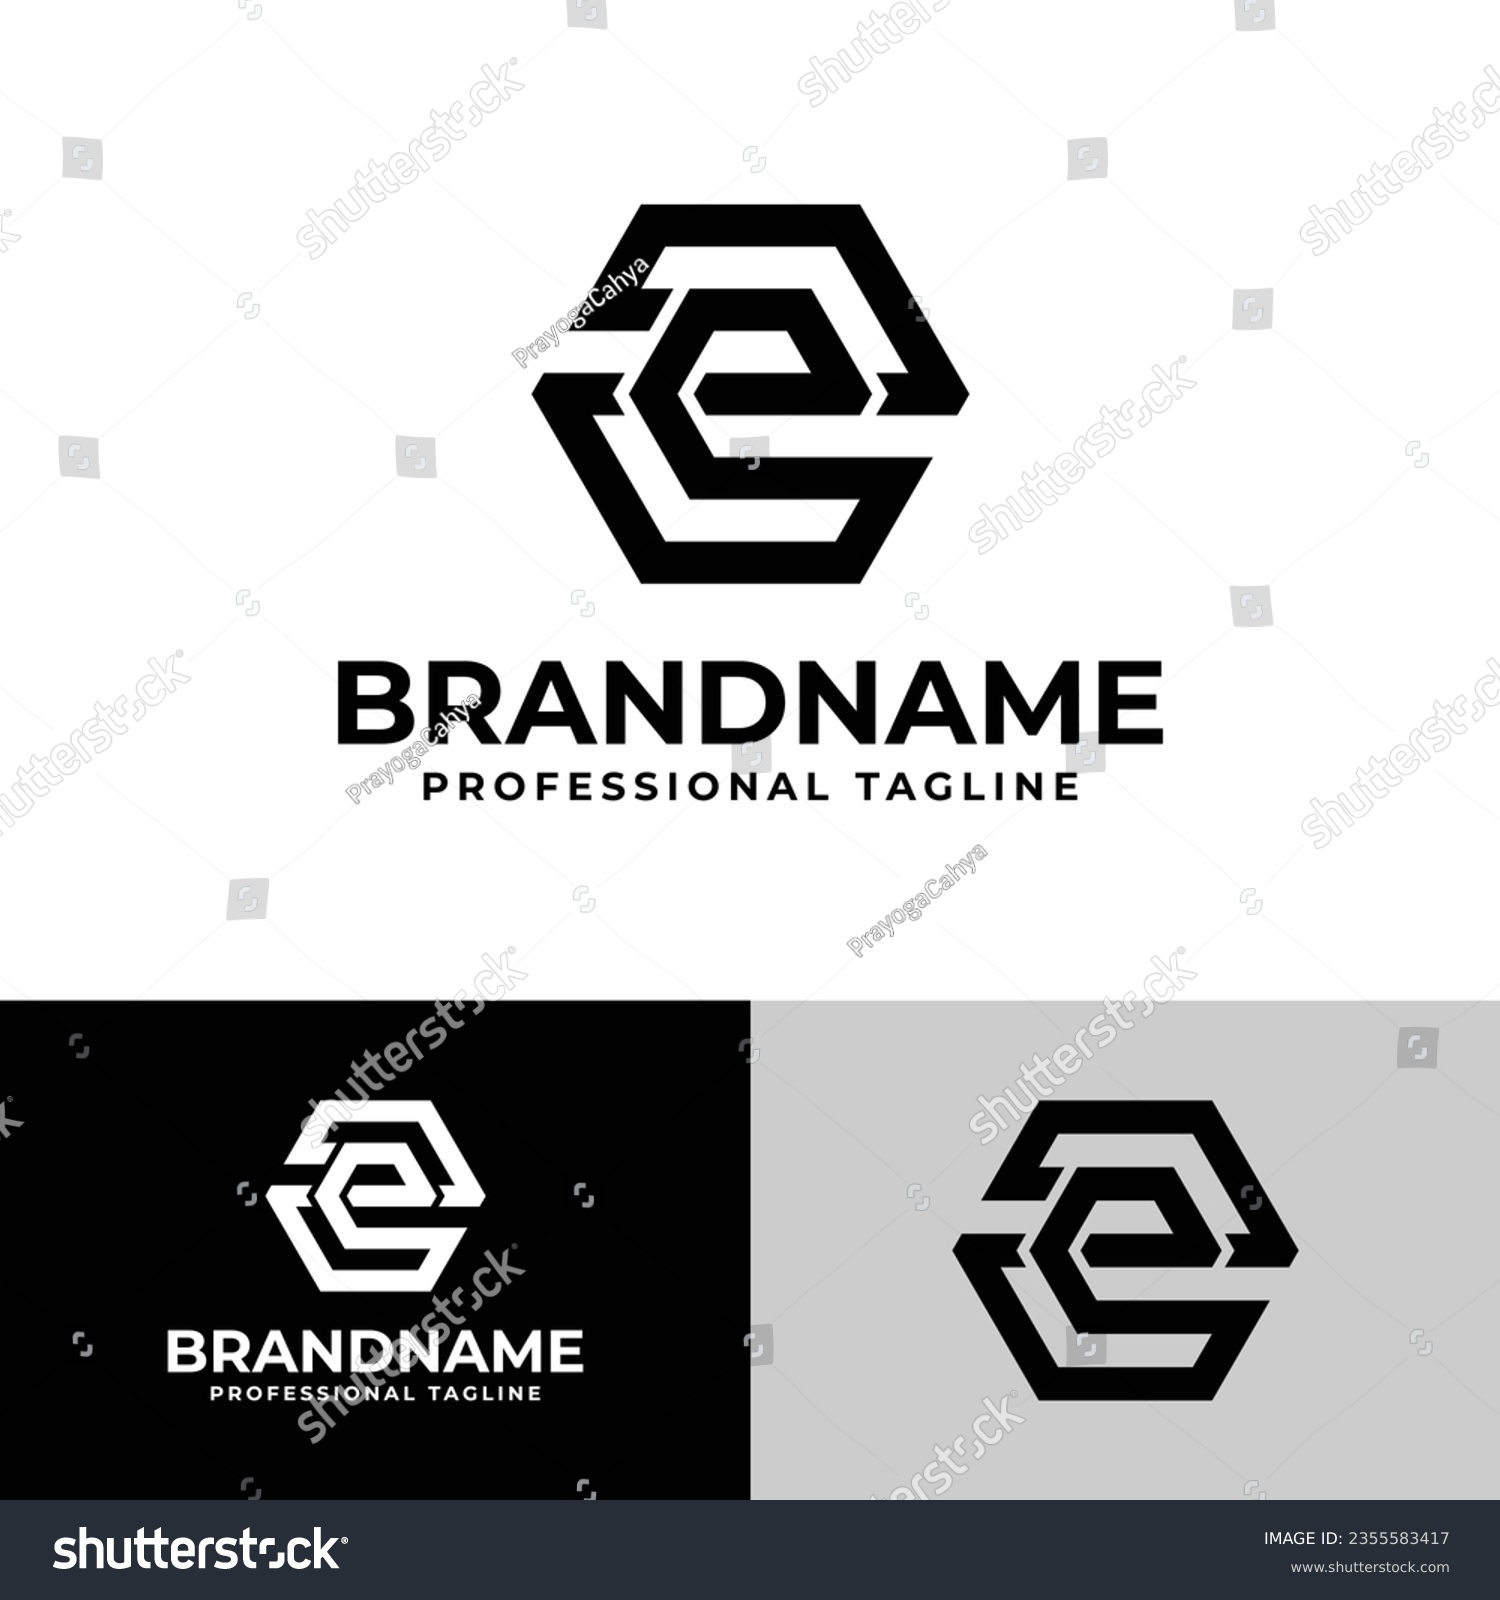 SVG of Letter EZ Arrow Hexagonal Logo, suitable for any business related to Hexagonal with EZ or ZE initial. svg